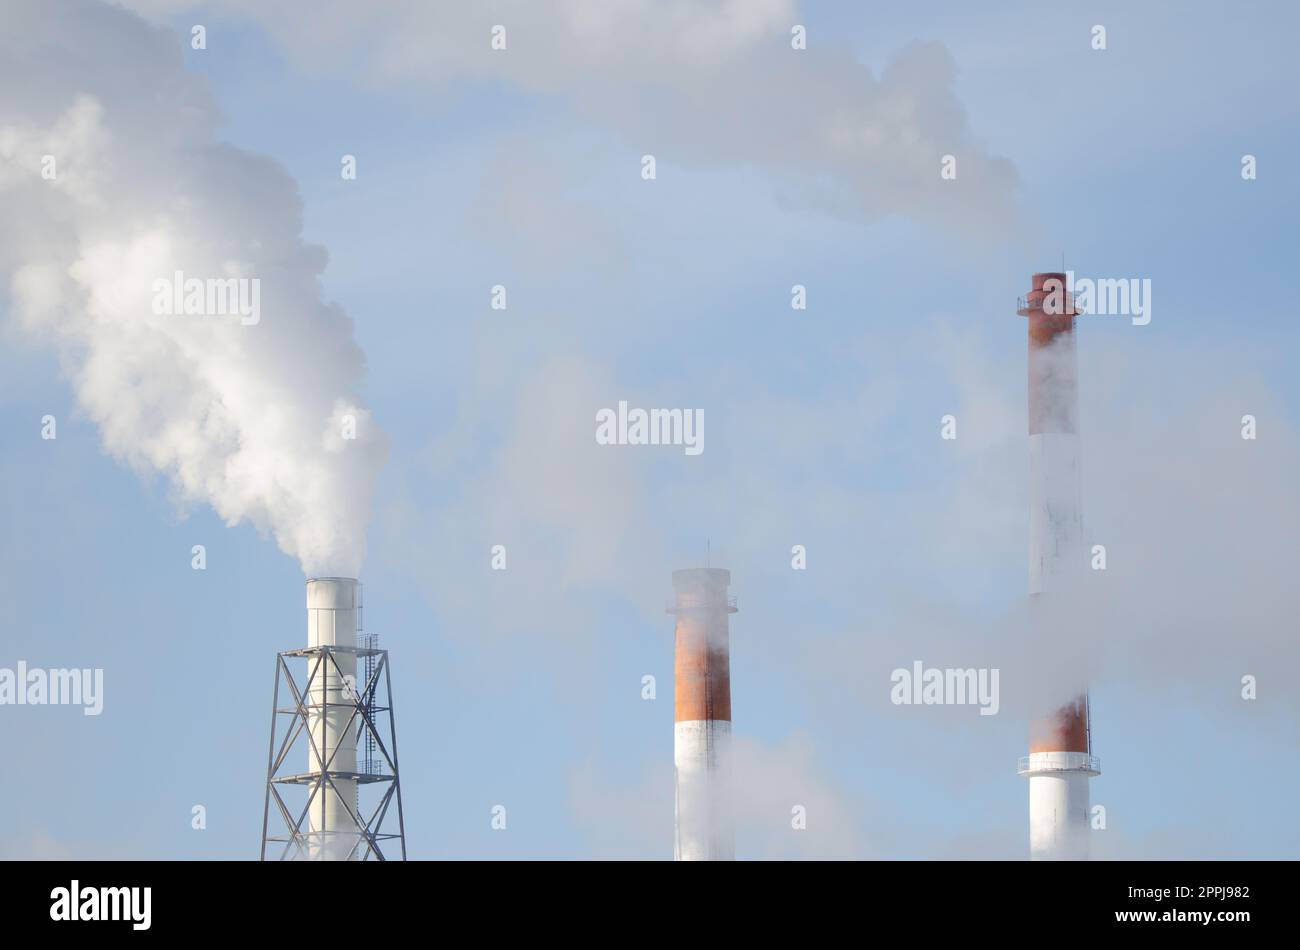 Chimneys of a pulp and paper industry. Stock Photo